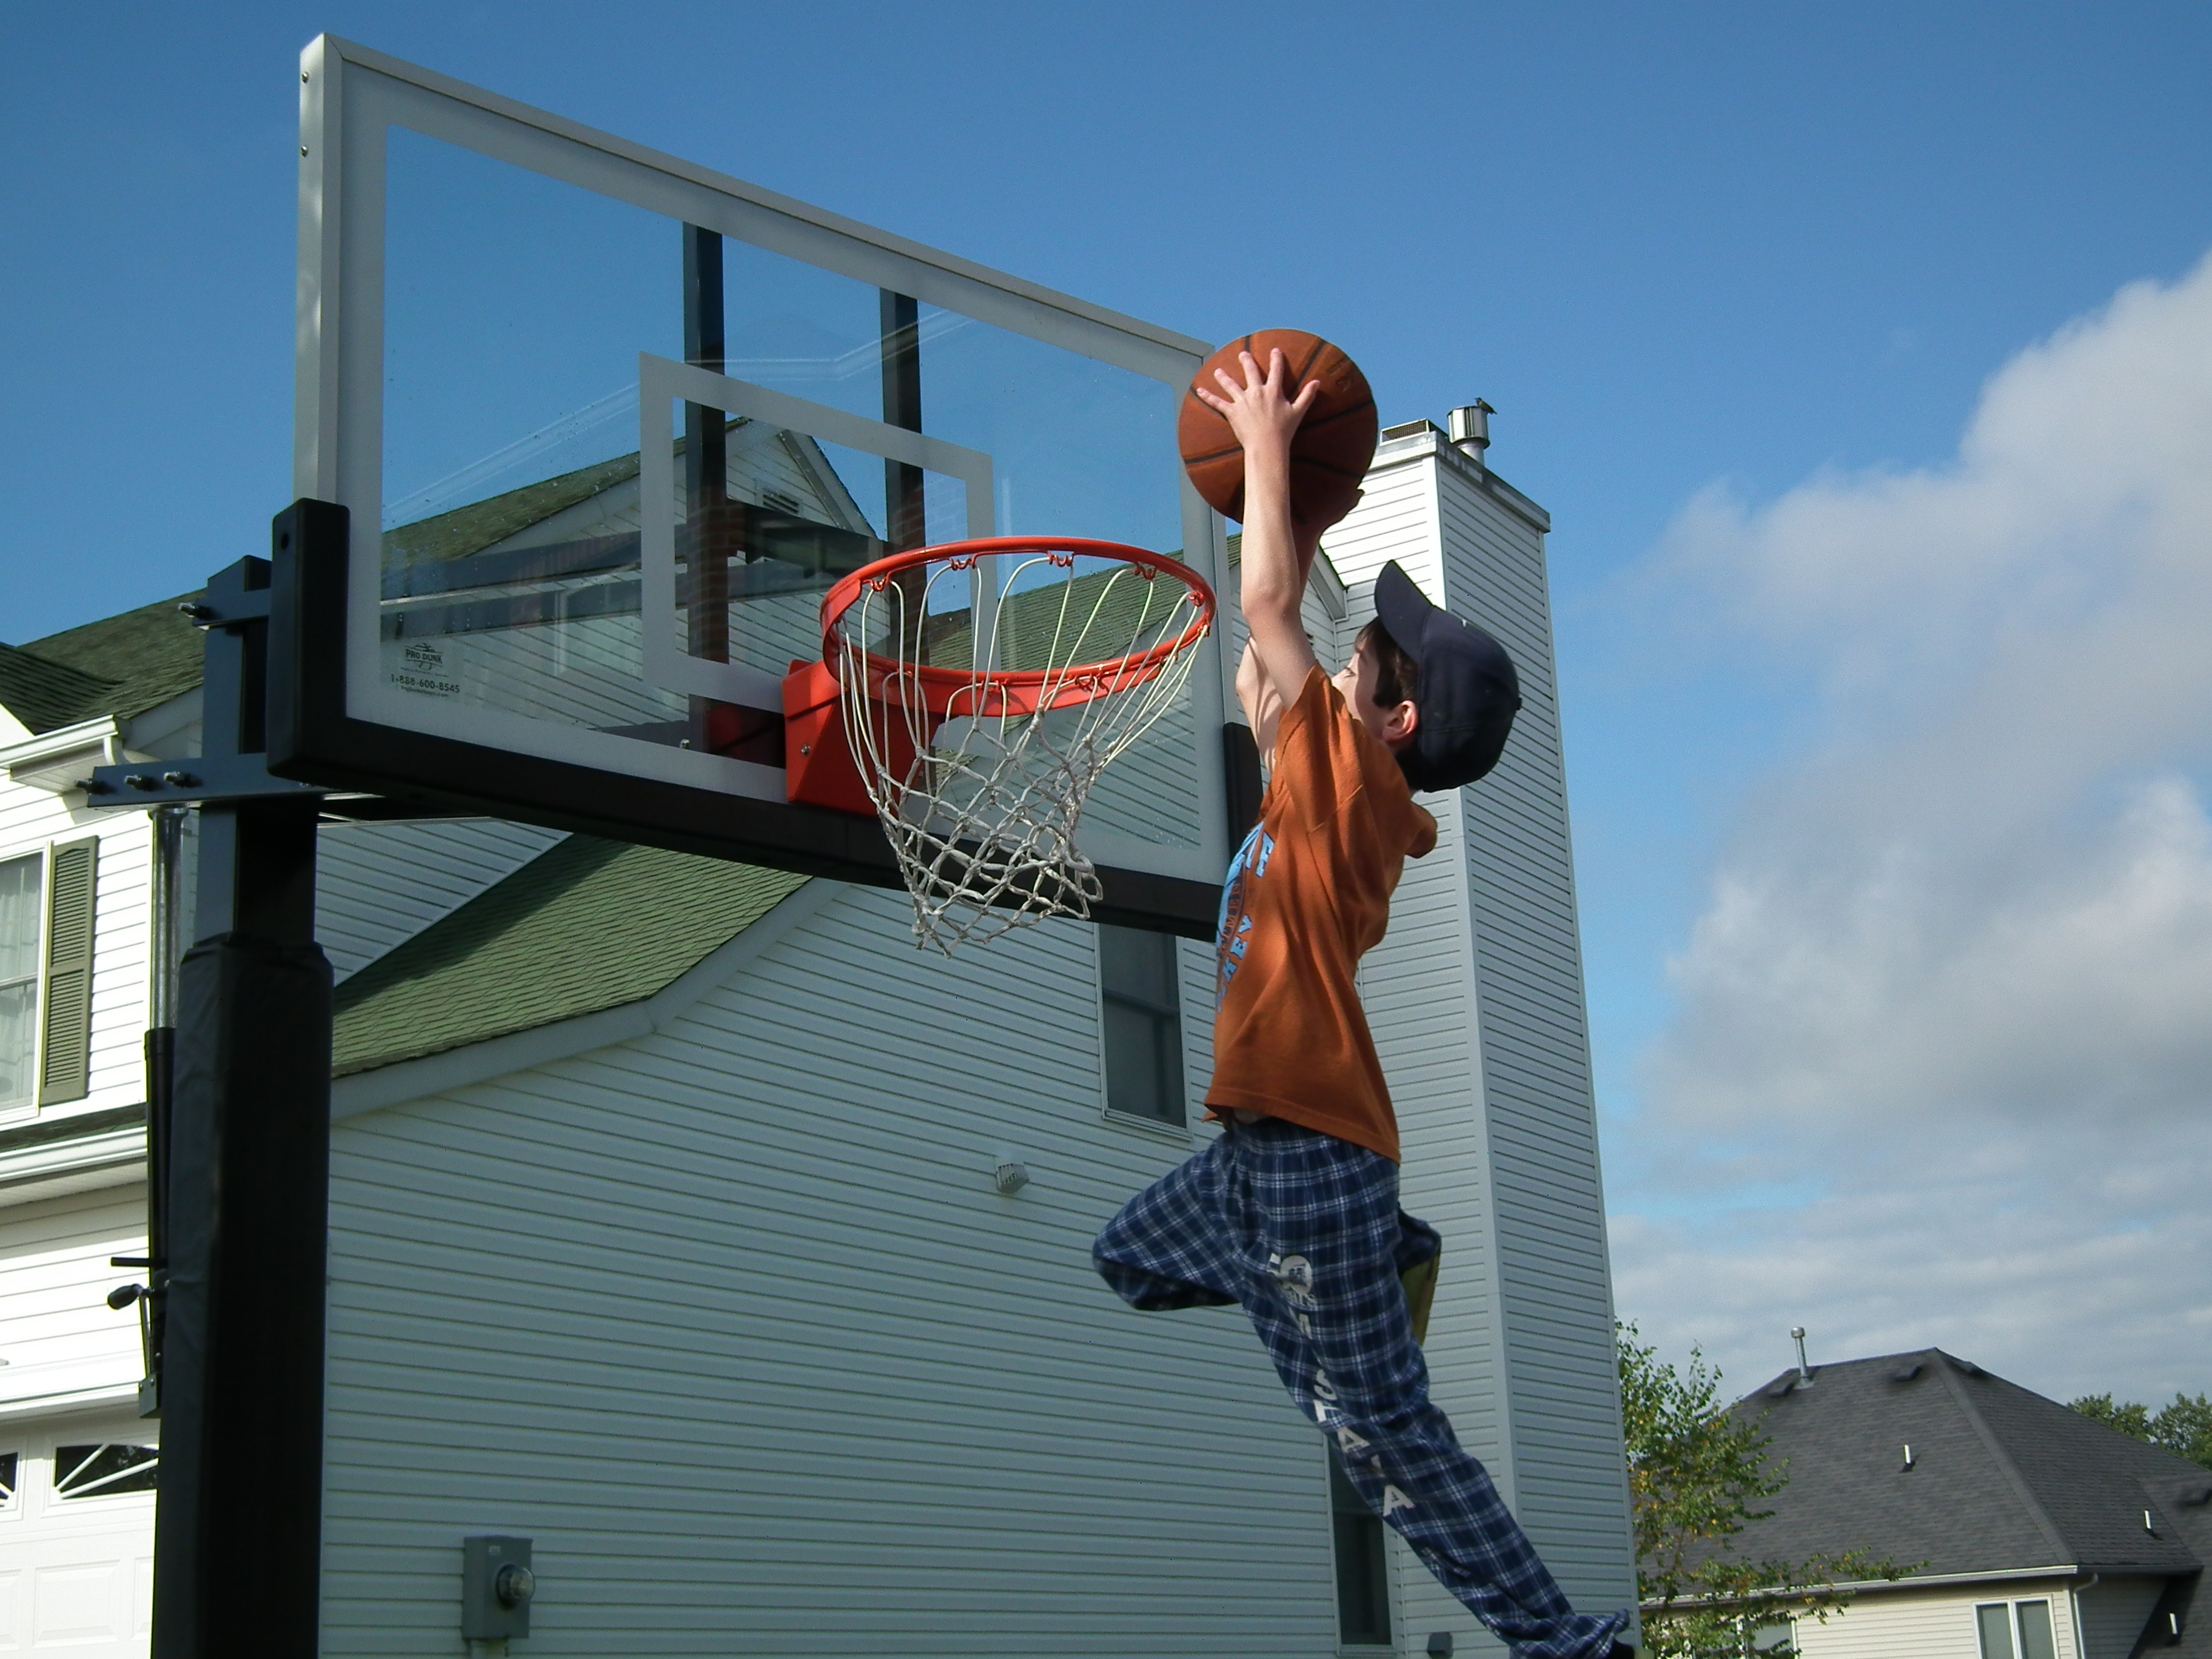 This boy likes to dunk the basket a lot.